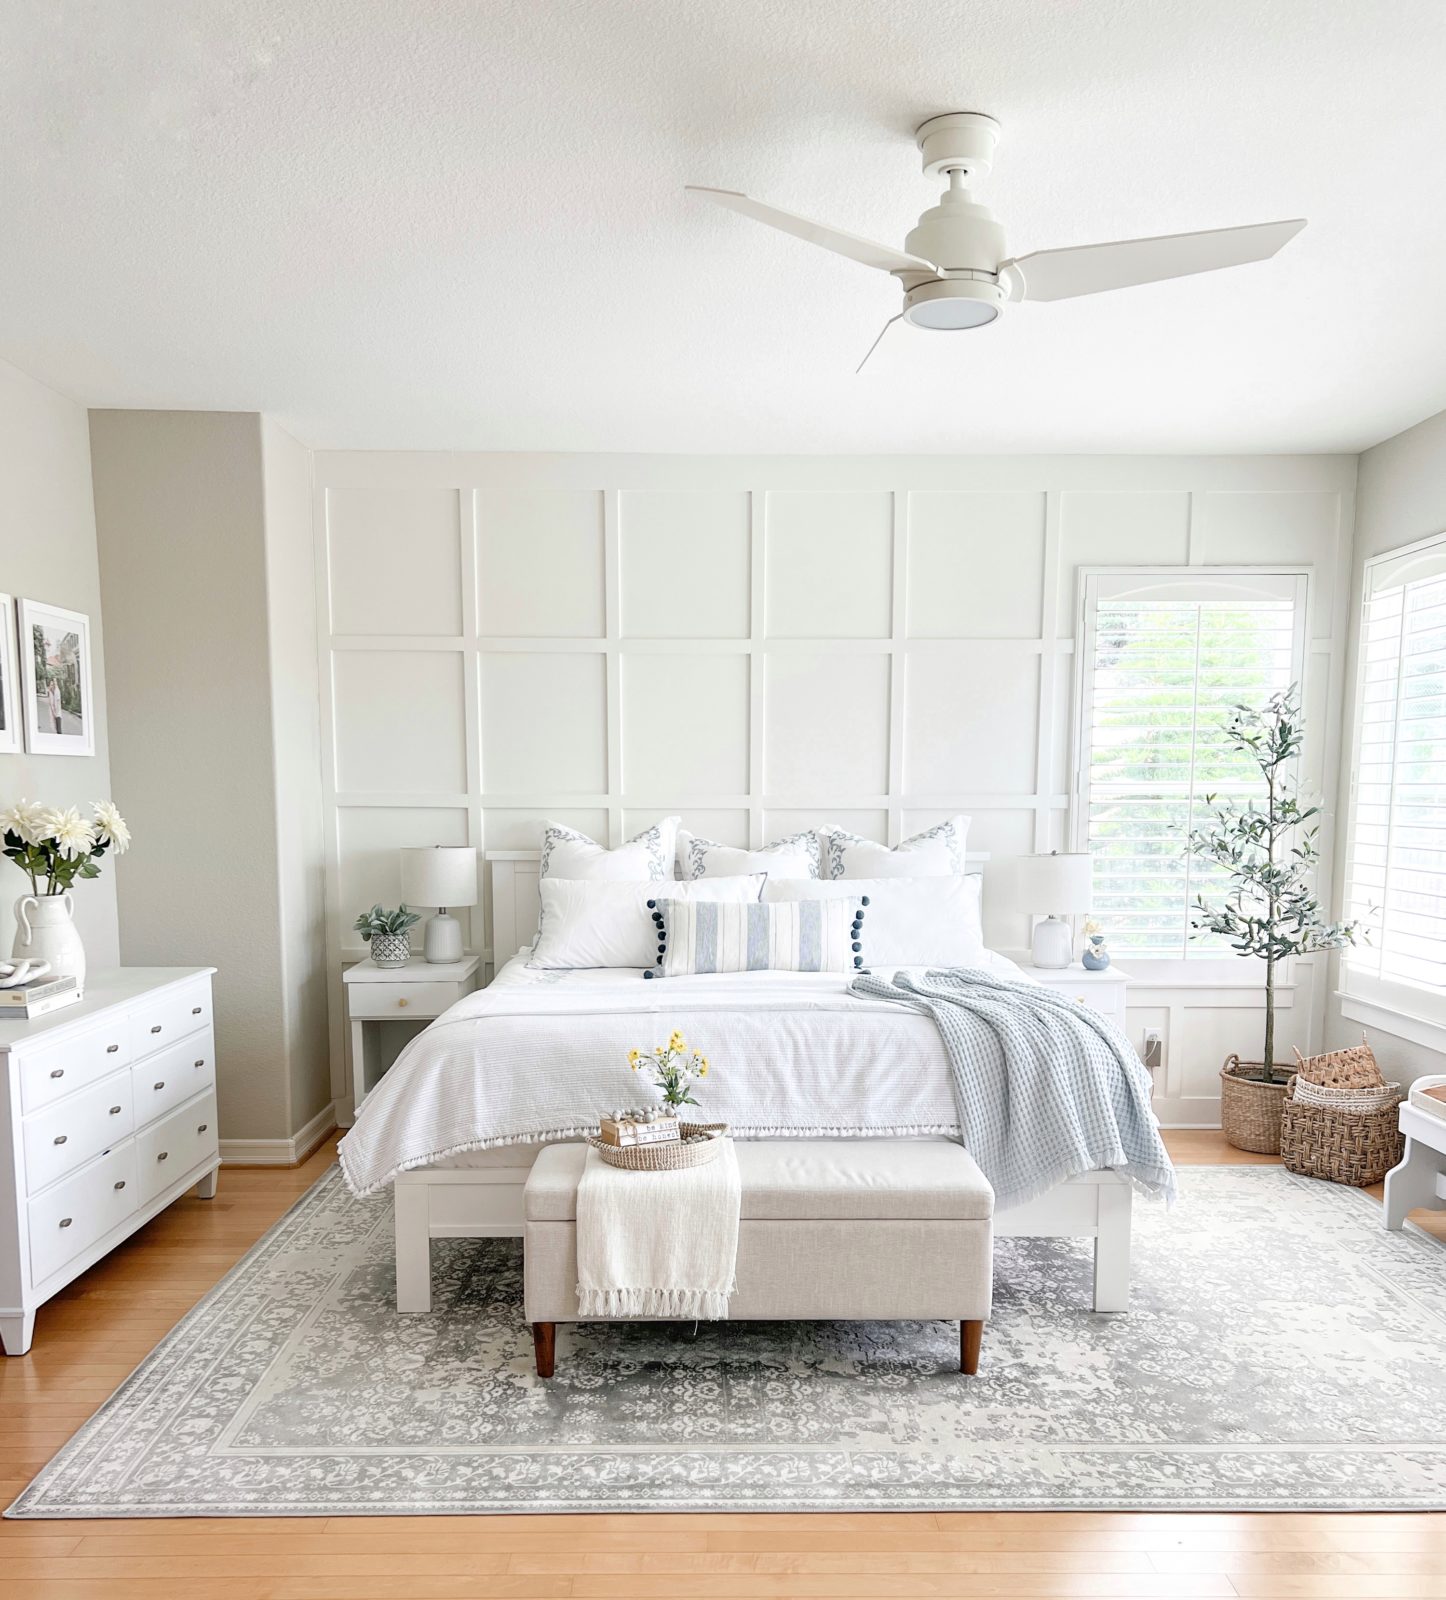 Light and Fresh Summer Updates in the Bedroom - Pasha is Home